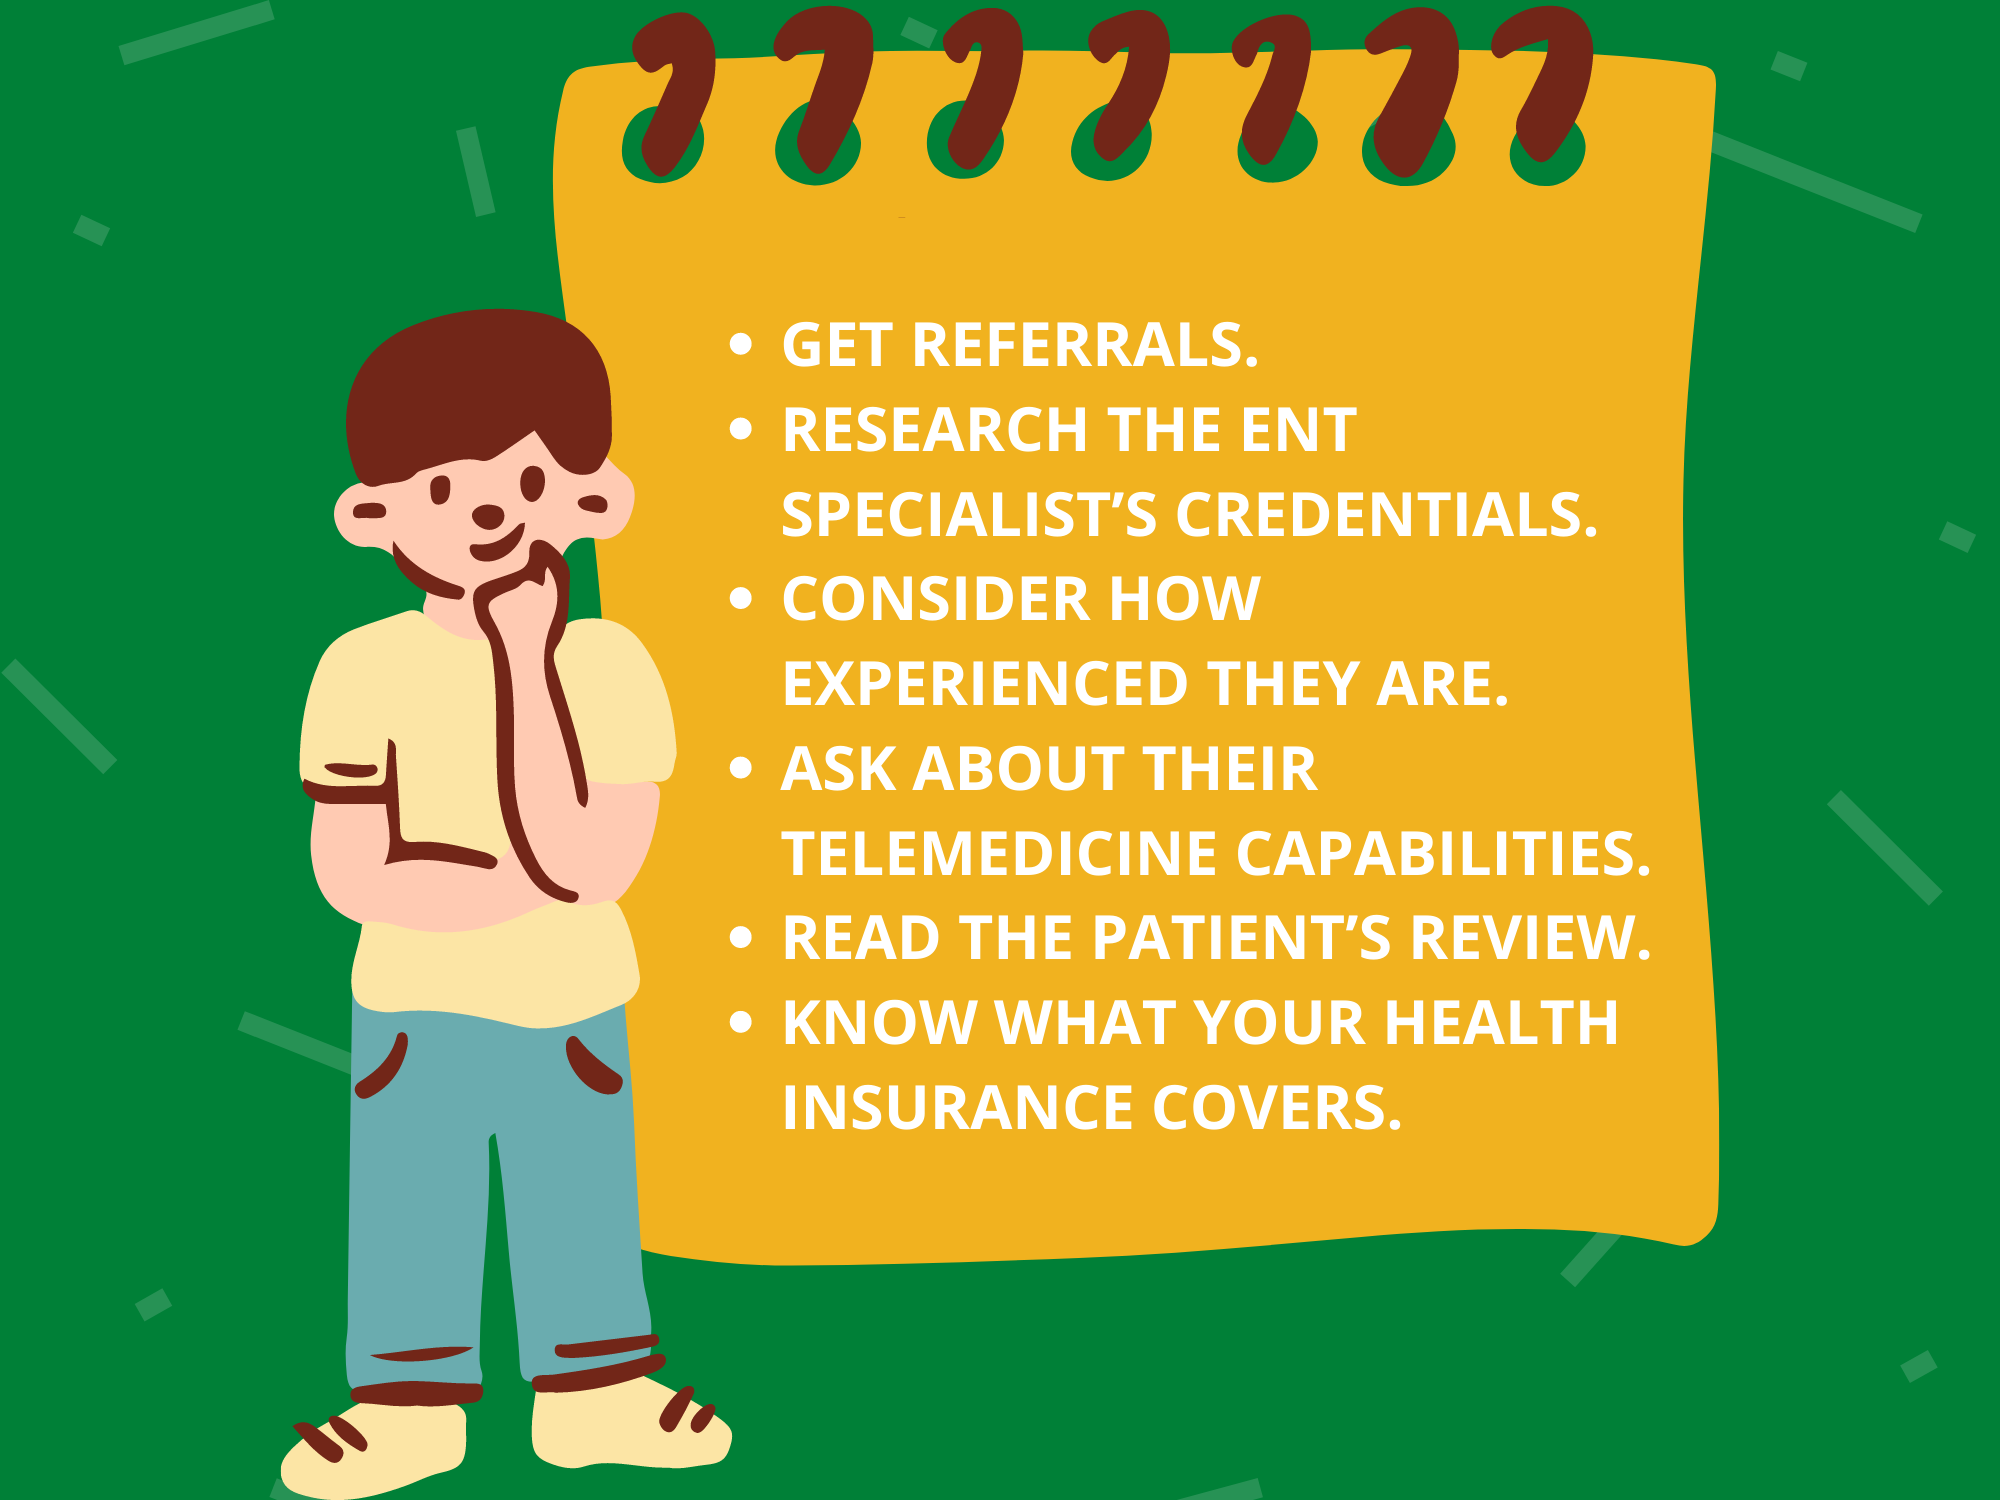 GET-REFERRALS.-RESEARCH-THE-ENT-SPECIALISTS-CREDENTIALS.-CONSIDER-HOW-EXPERIENCED-THEY-ARE.-ASK-ABOUT-THEIR-TELEMEDICINE-CAPABILITIES.-READ-THE-PATIENTS-REVIEW..png